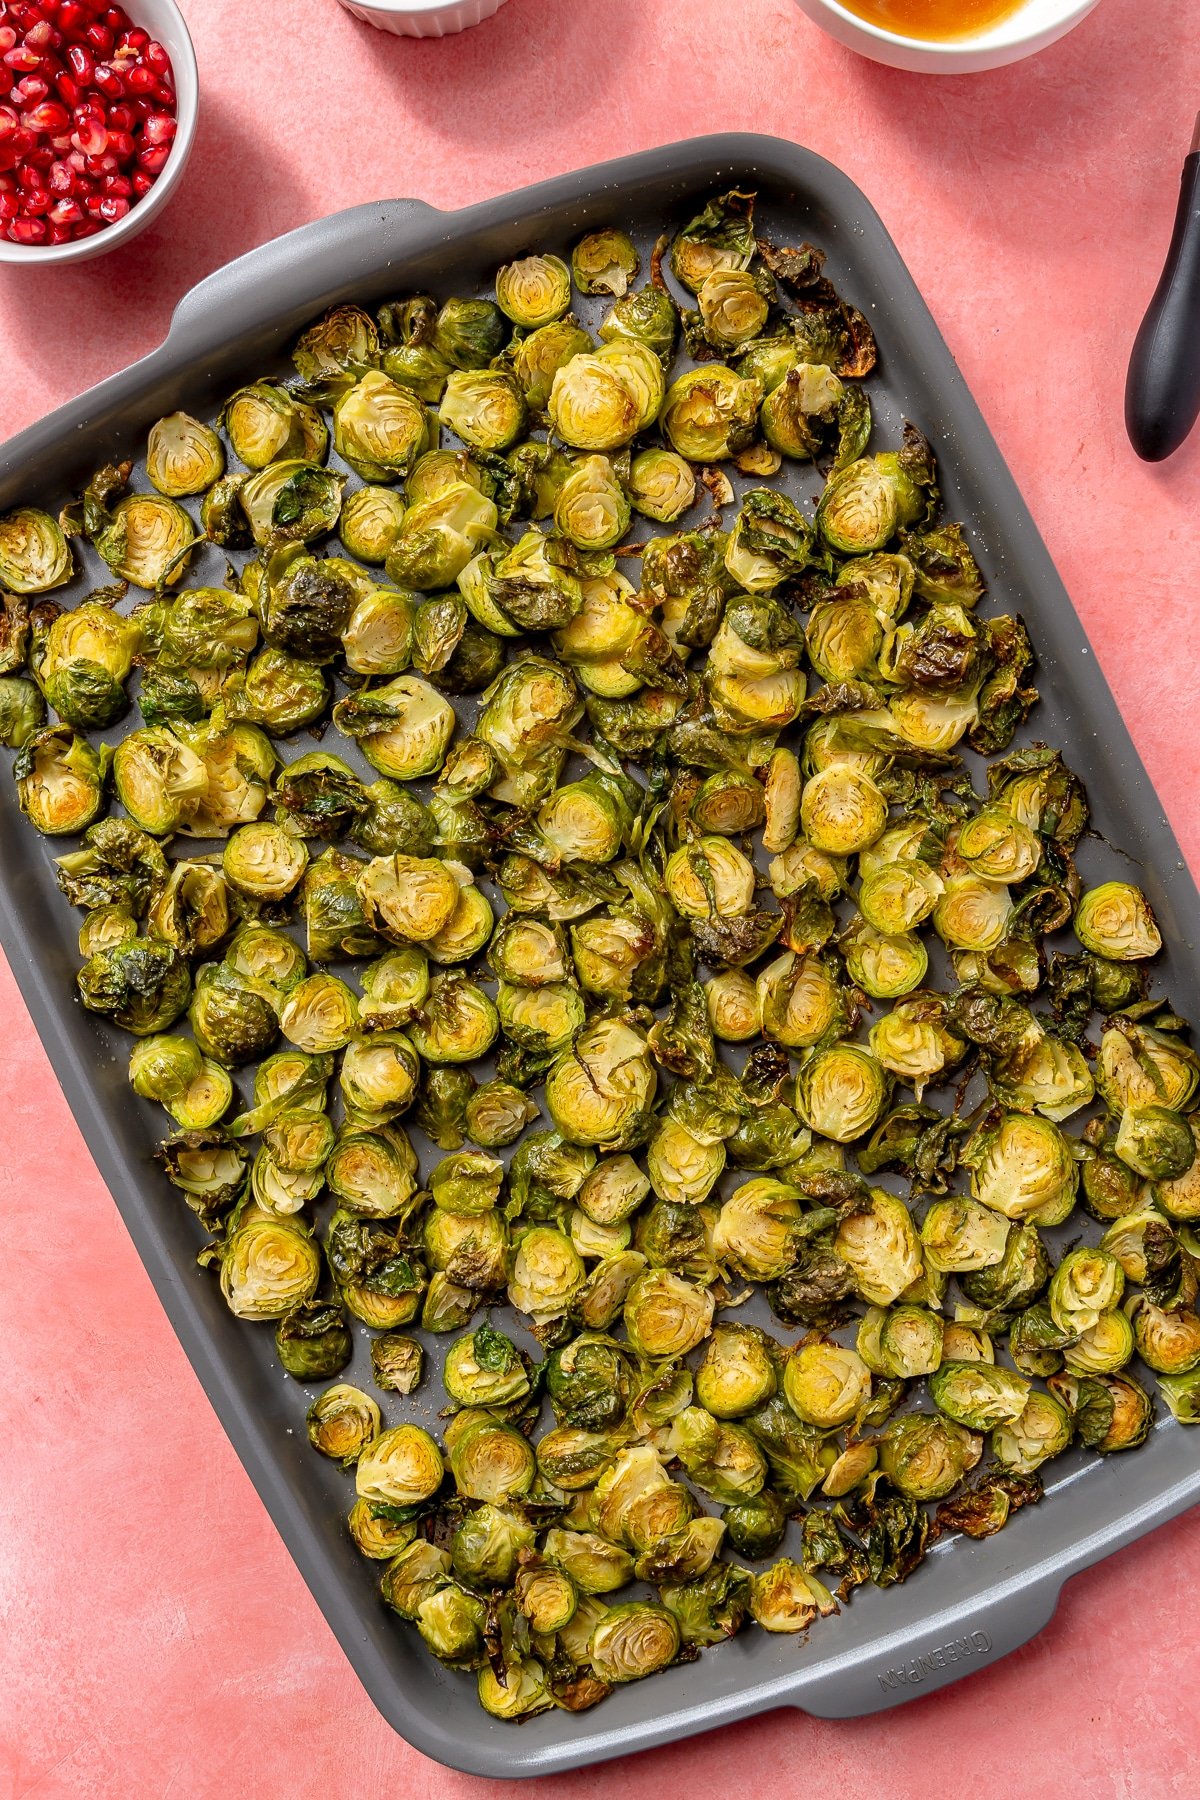 Roasted, crispy, golden-brown brussels sprouts sit on a baking tray.